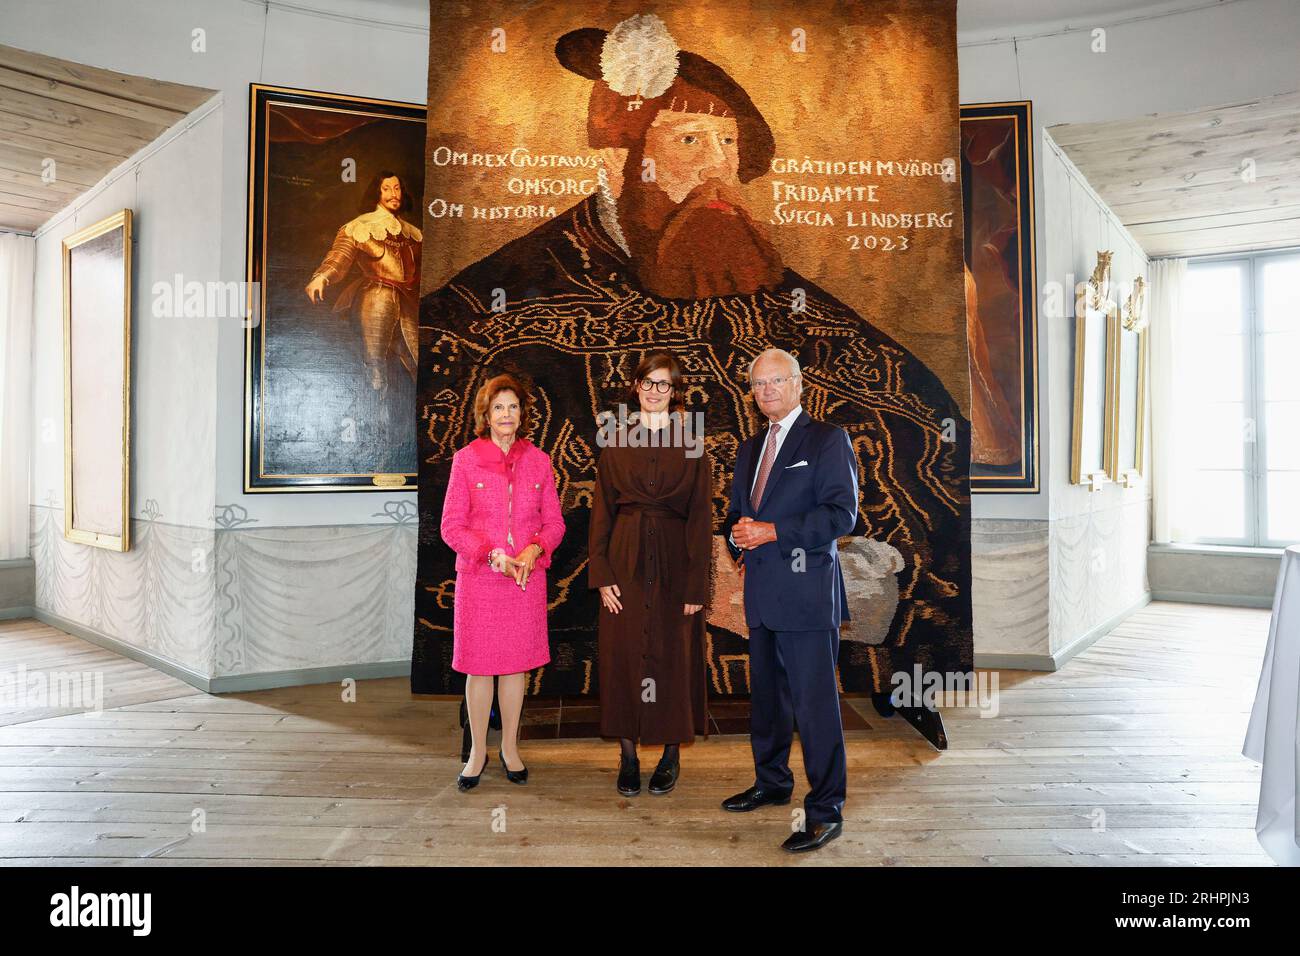 Sweden's King Carl XVI Gustaf and Queen Silvia at a textile weaving depicting Gustav Vasa by the artist Frida Lindberg (centre) at Gripsholm Castle in Mariefred during an  anniversary evening on the occasion of the 500th anniversary of the election of King Gustav Vasa. Mariefred, Sweden, on August 18, 2023.Photo: Stefan Jerrevång/TT code 60160 Stock Photo